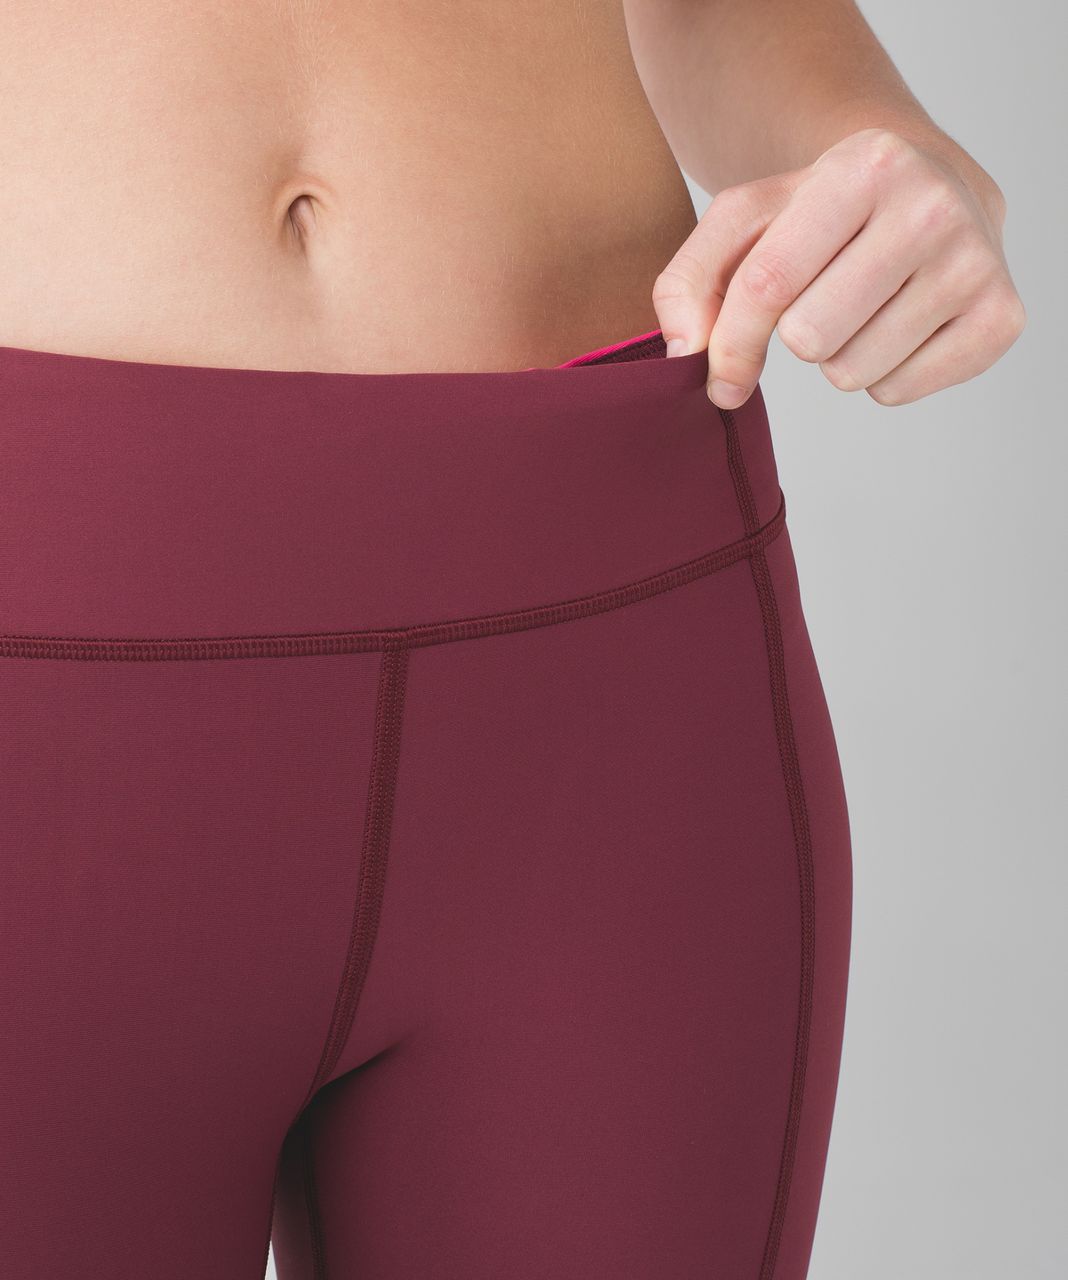 Lululemon tight stuff tight review wine berry 4 - Agent Athletica